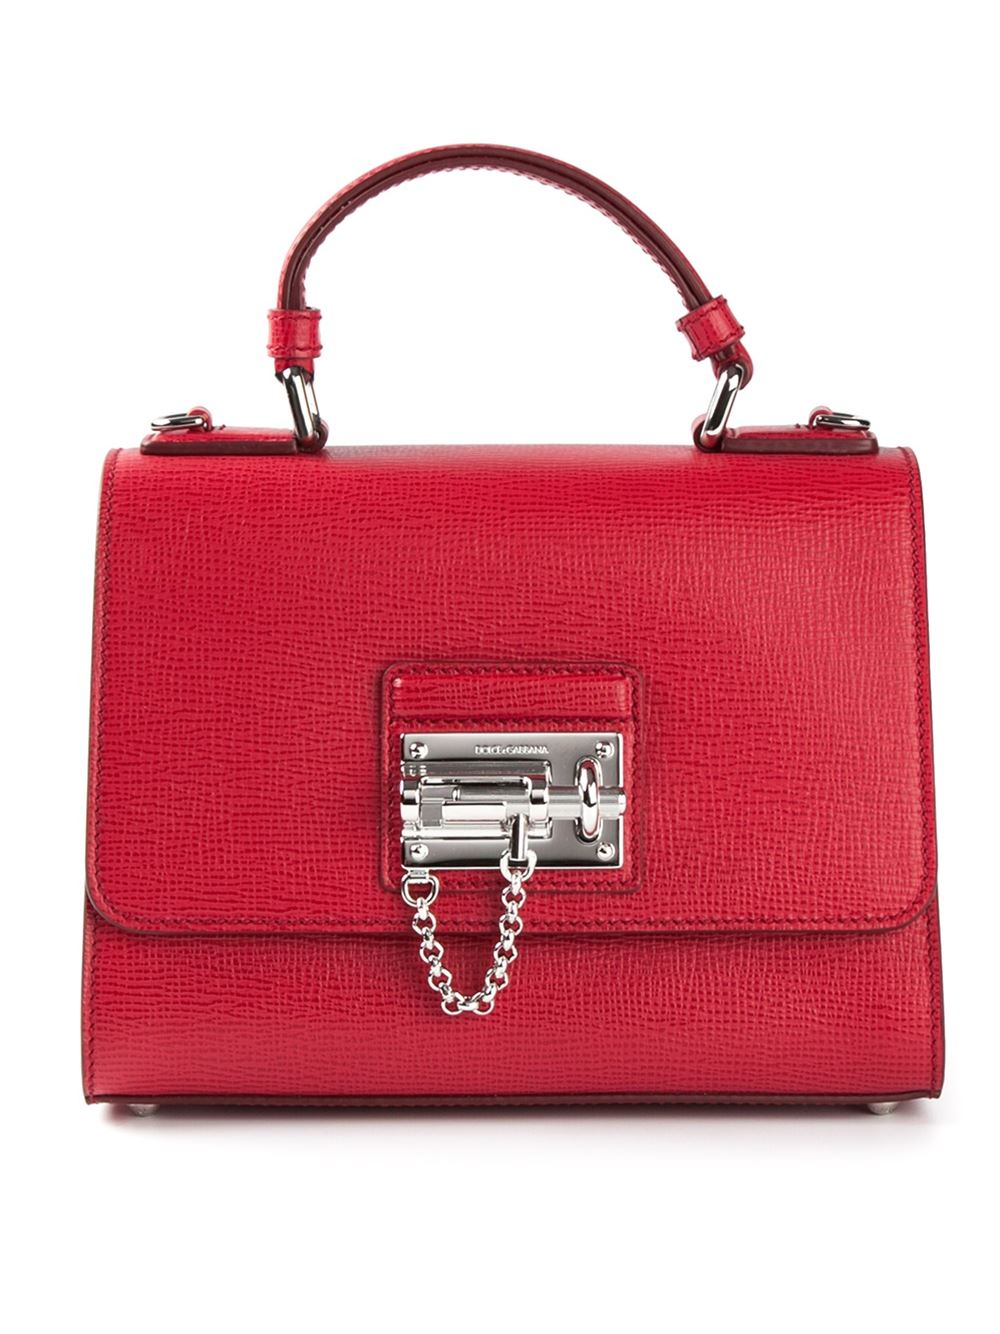 Dolce & Gabbana Chain Feature Tote in Red